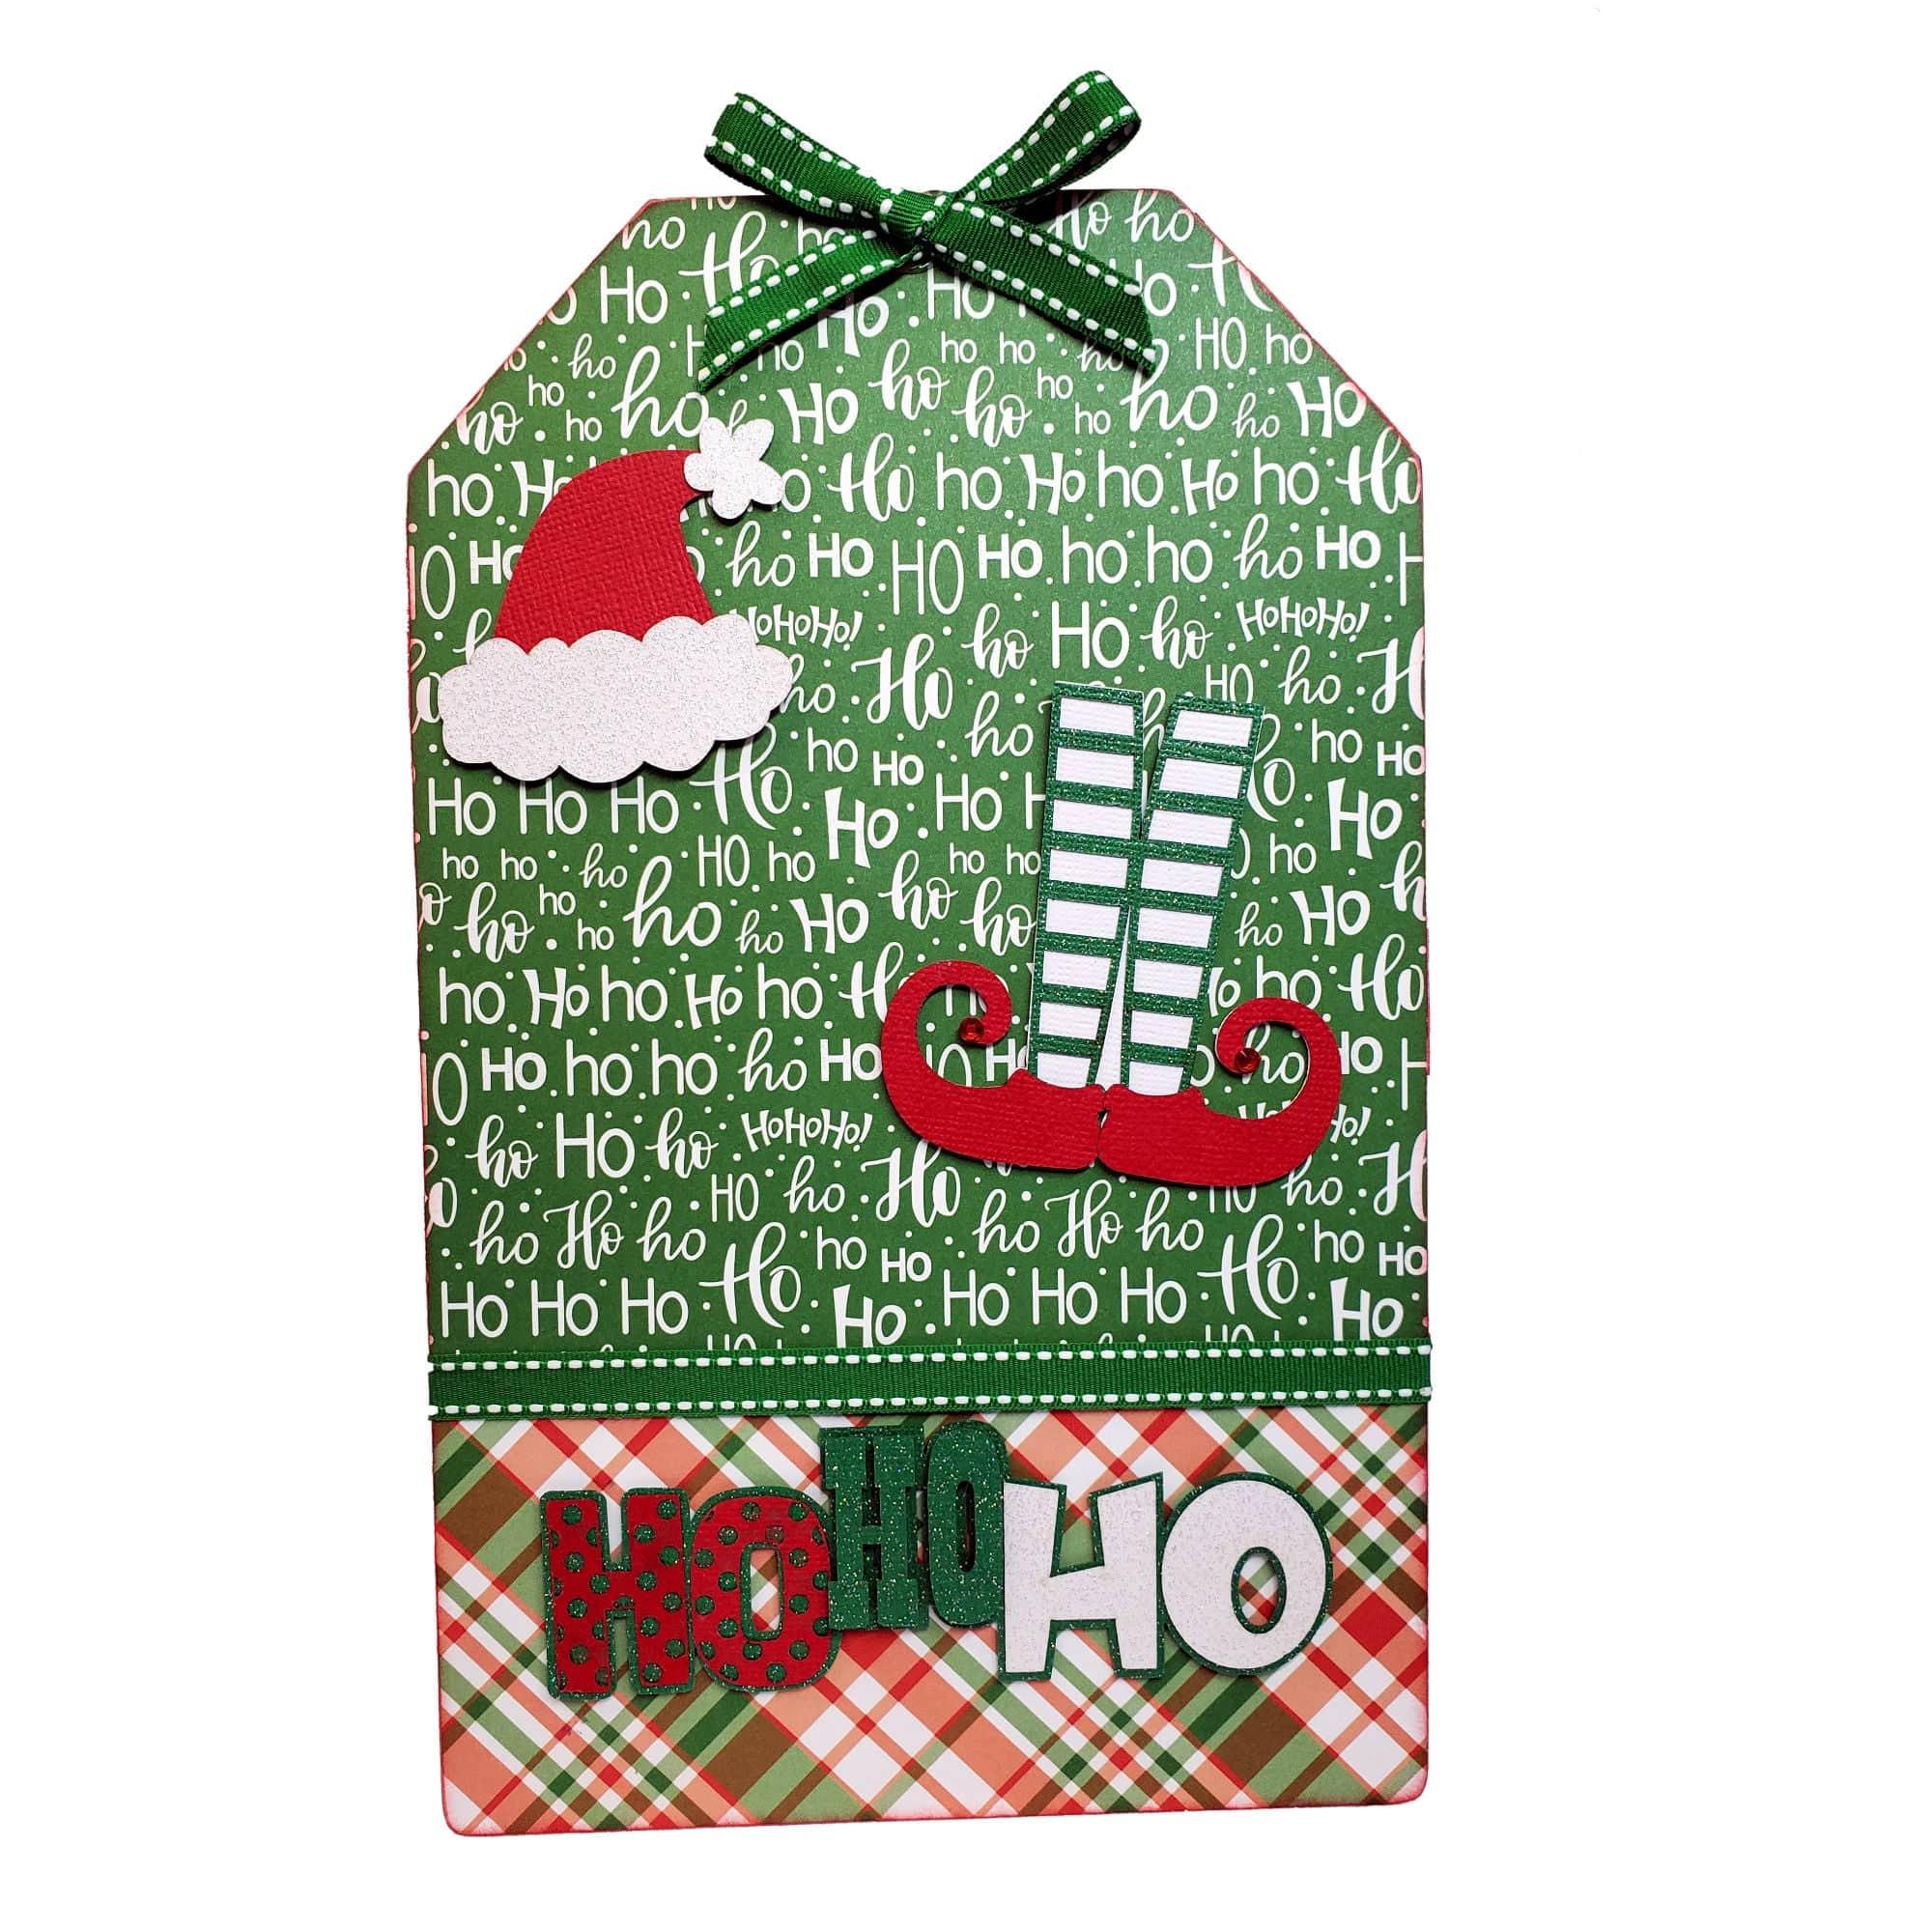 Ho Ho Ho Plaid 6.5 x 10 Interactive, Magnetic Photo Frame & Accessory Magnets by SSC Designs